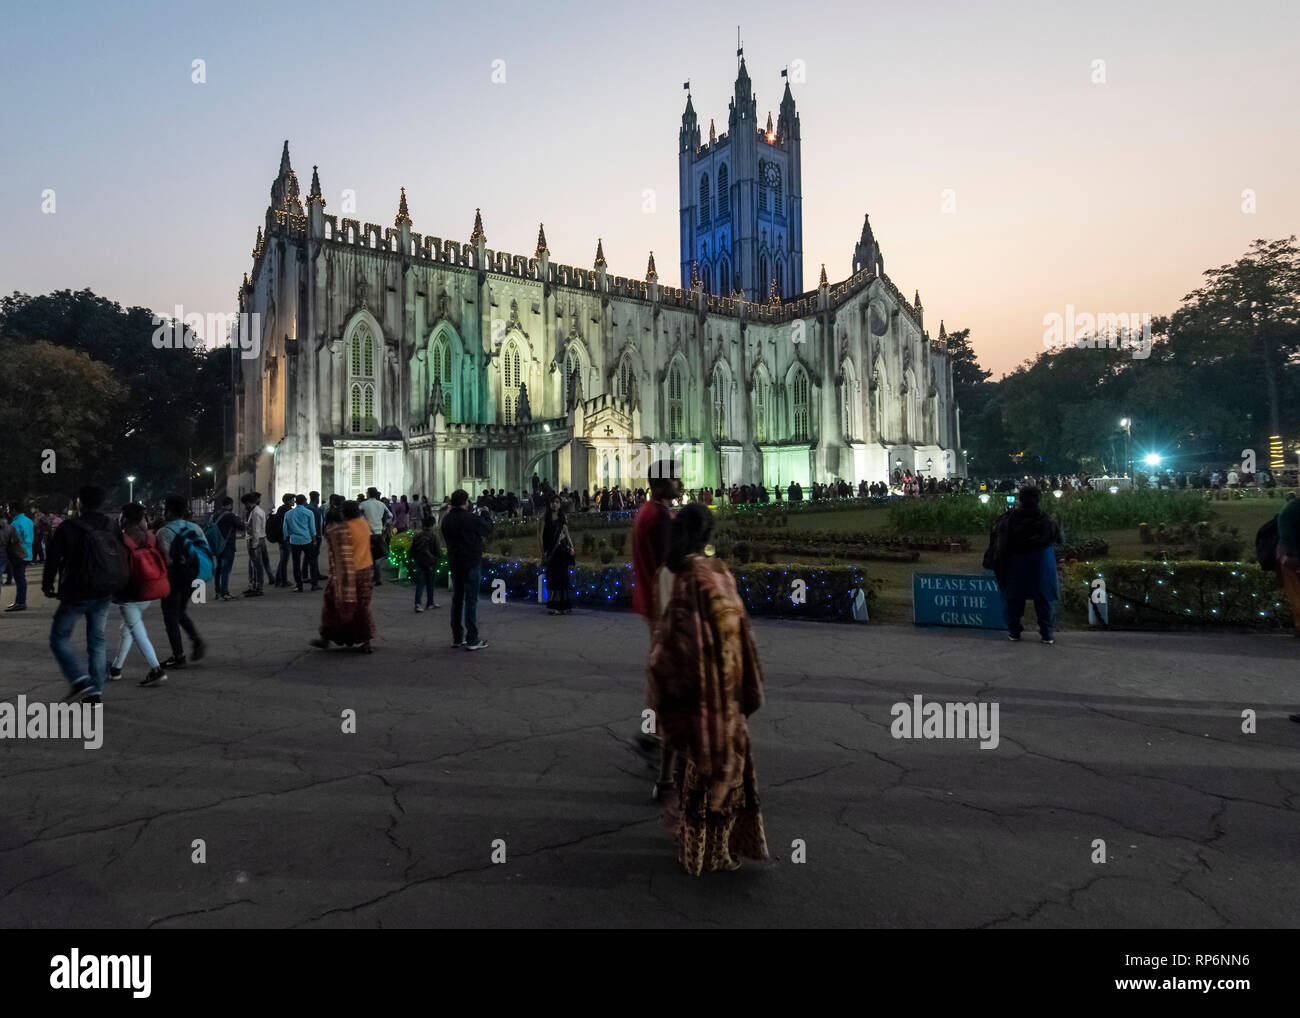 St Paul's Cathederal within the grounds of the Victoria Memorial with local people walking visiting in Kolkata at dusk evening night time. Stock Photo